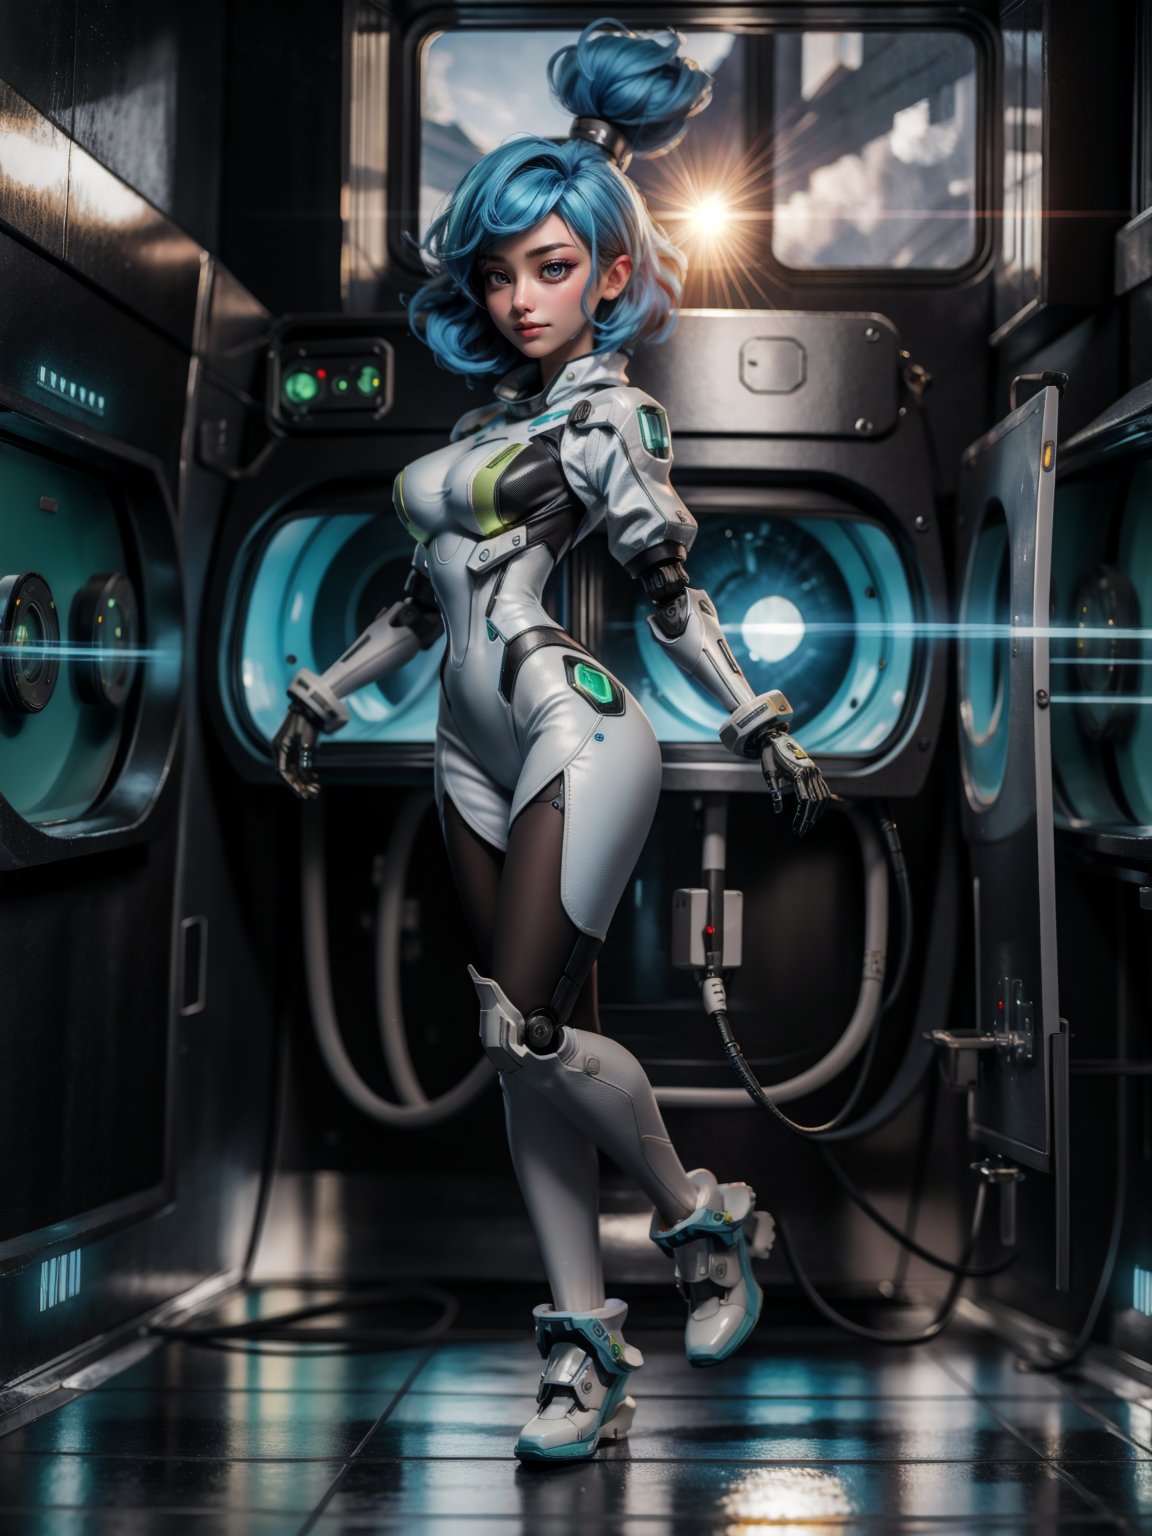 {((1woman))}, only she is {((wearing white mechanical suit with extremely tight and transparent black mechanical parts on her body)), she has ((extremely gigantic breasts)), only she has ((very blue hair short, green eyes)), ((erotic pose)), only she is smiling and staring at the viewer, ((in a spaceship near the sun, window, teleportation, robots, equipment, machines on the walls))}, ((full body):1.5), 16k, best quality, best resolution, best sharpness,TinkerWaifu